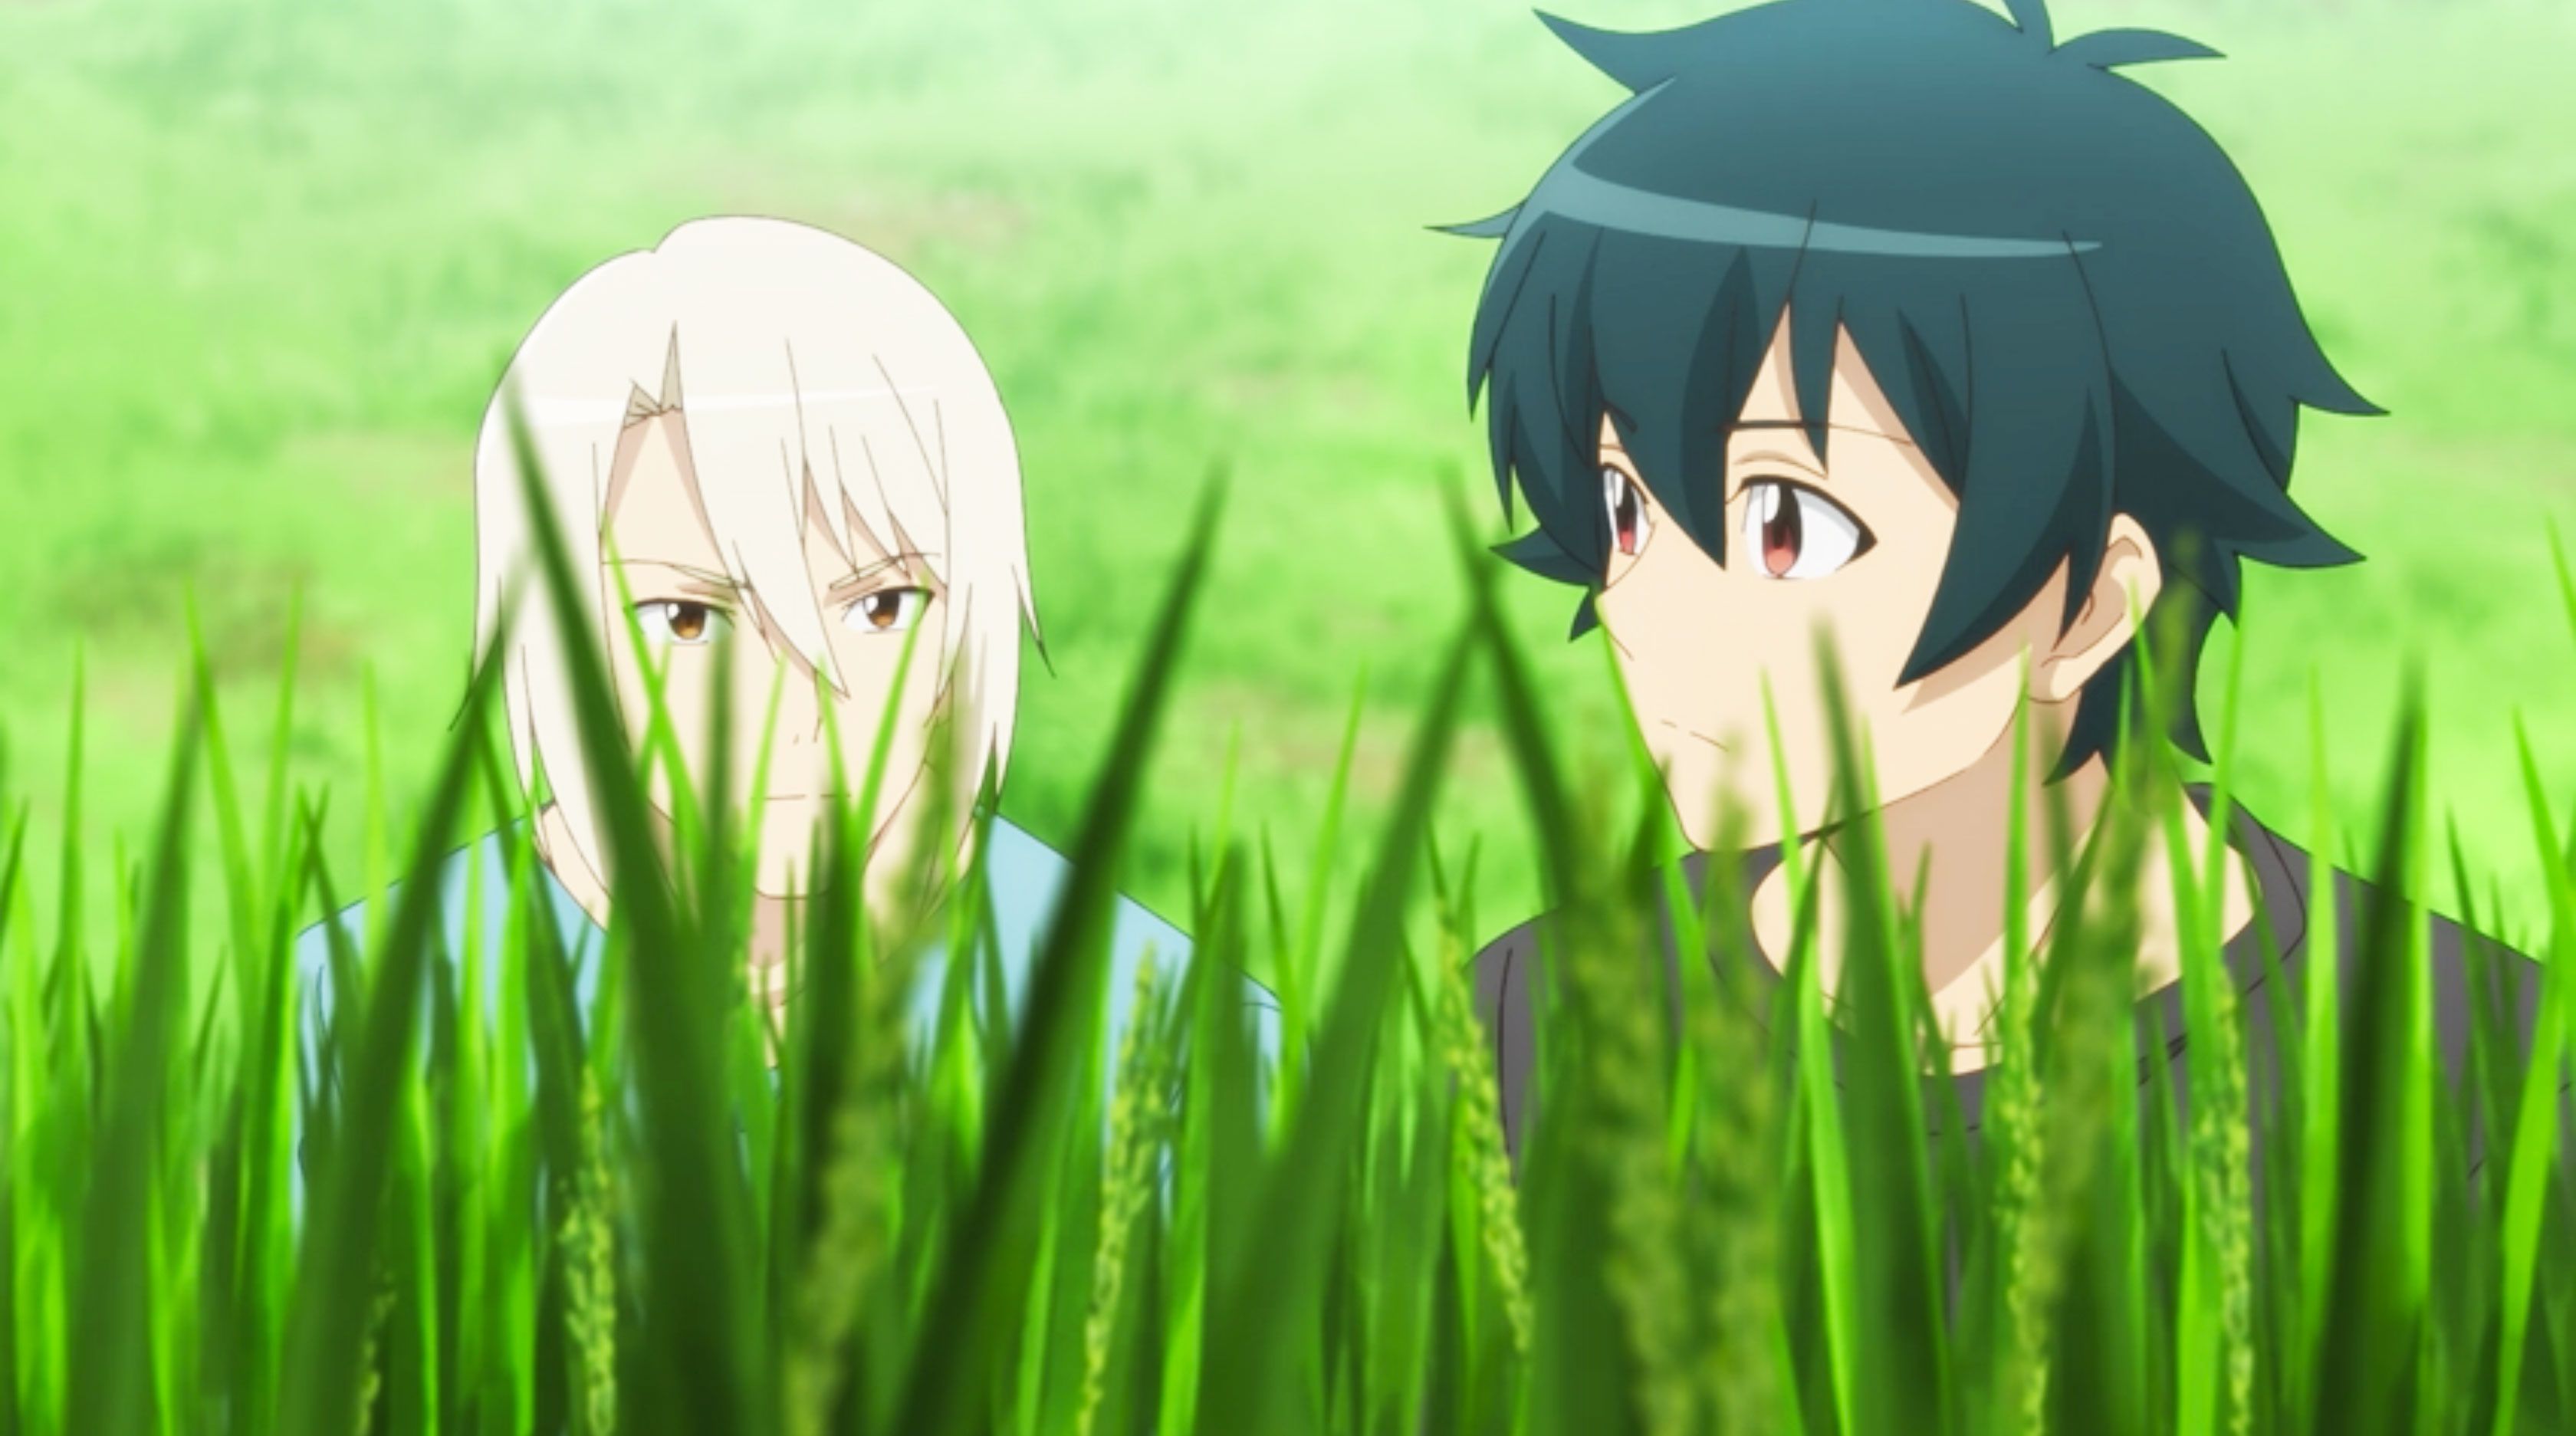 The Devil Is A Part-Timer Season 2 Episode 3 Review: Protect The Child